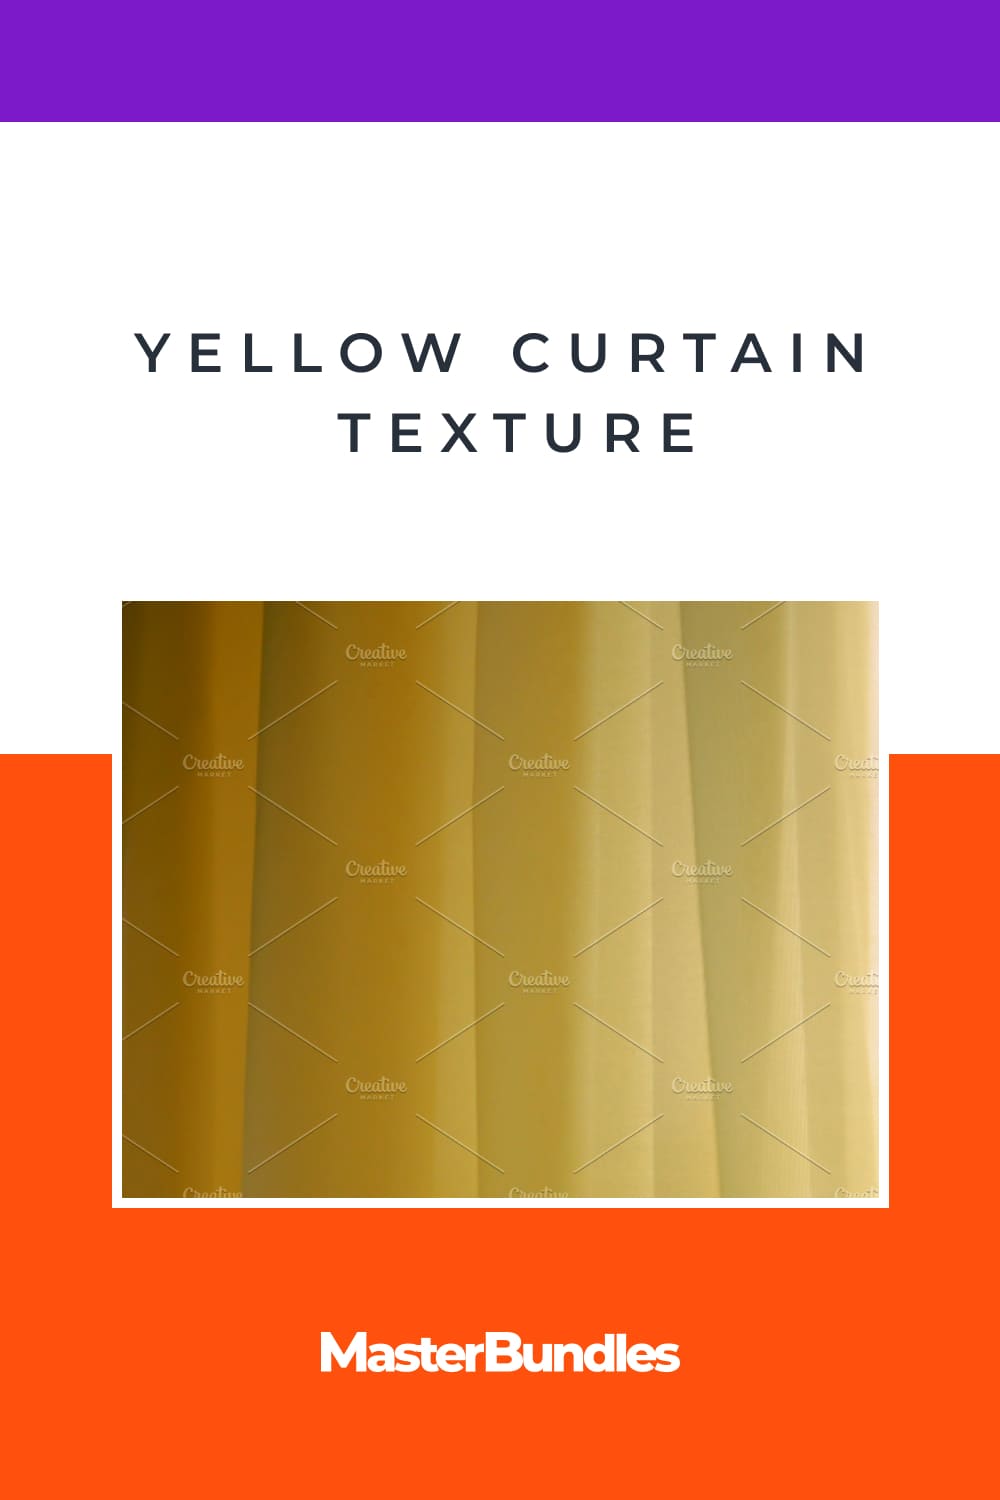 Gradient yellow texture for curtain.